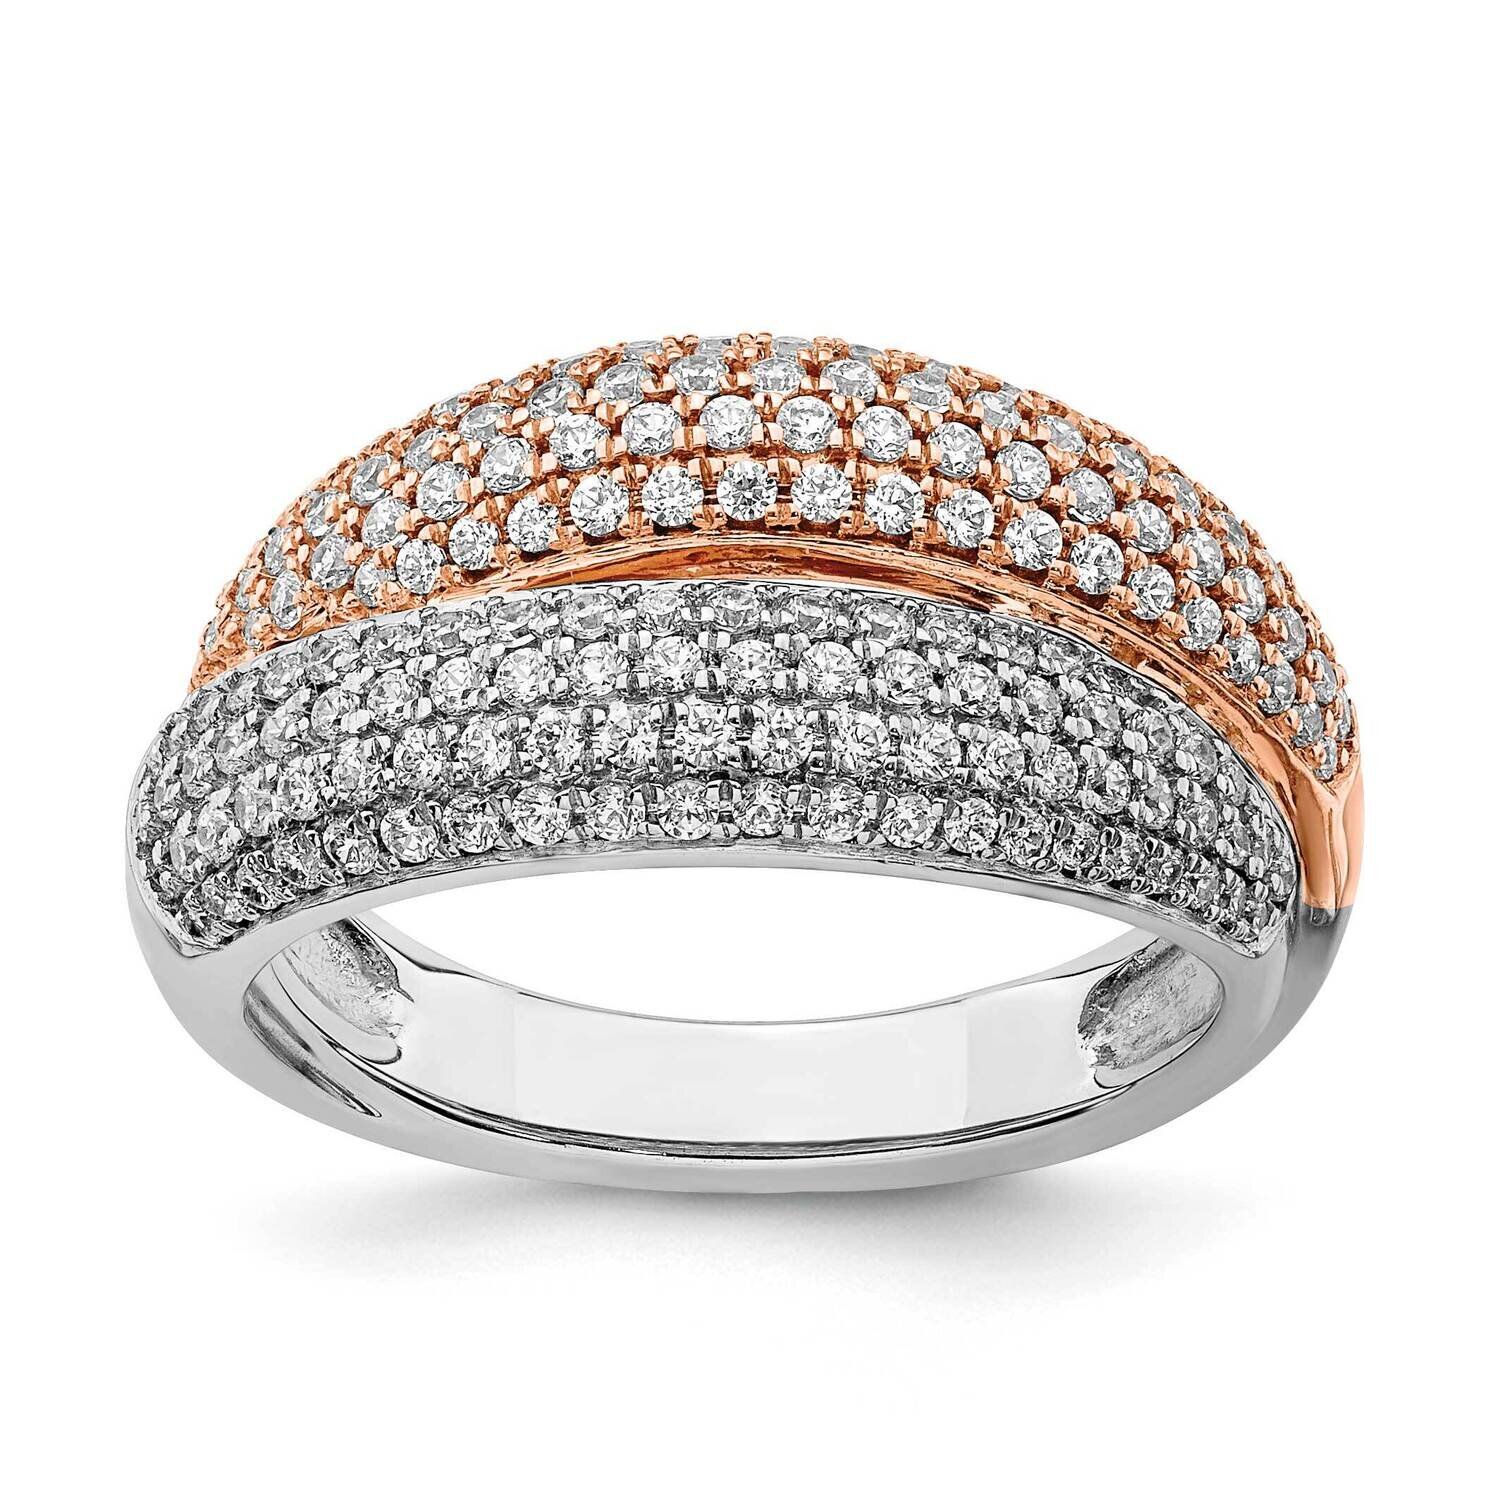 Pave Diamond Ring 14k Two-Tone Gold Polished RM8461-087-WRA